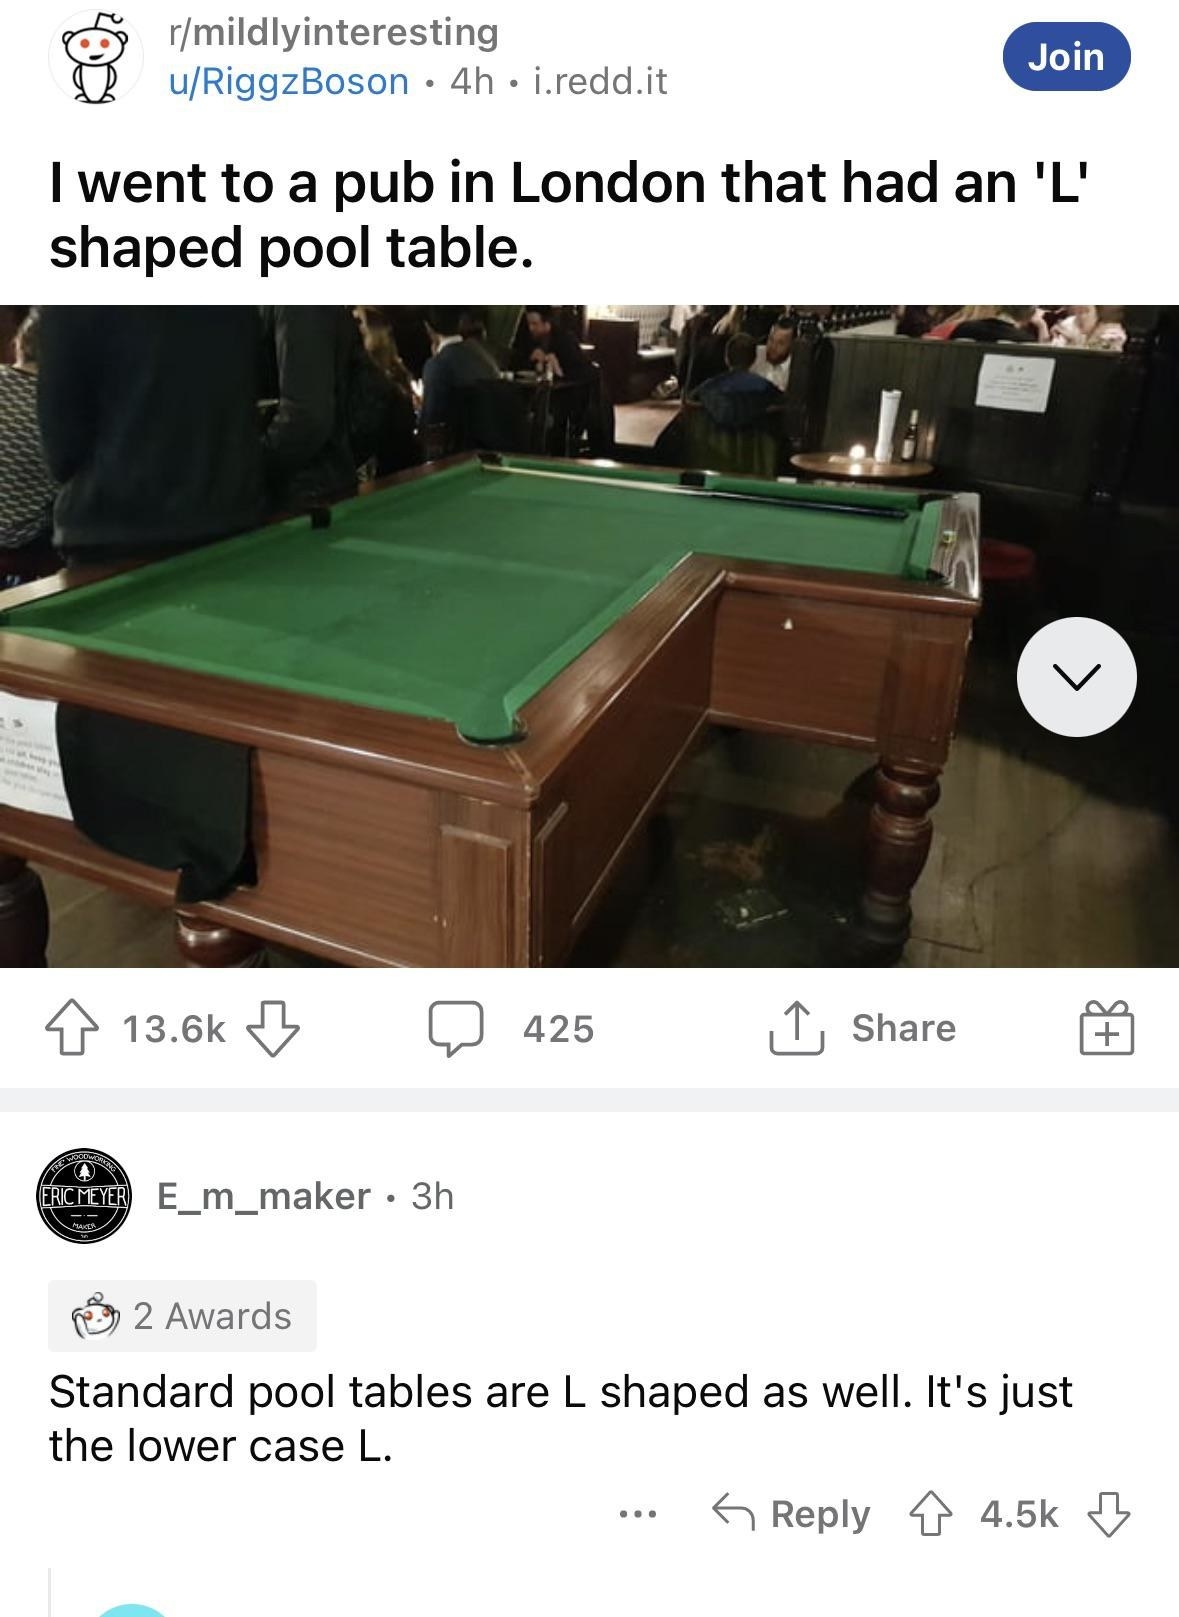 Picture of an L-shaped pool table that someone responds to by saying standard pool tables are just a lowercase l